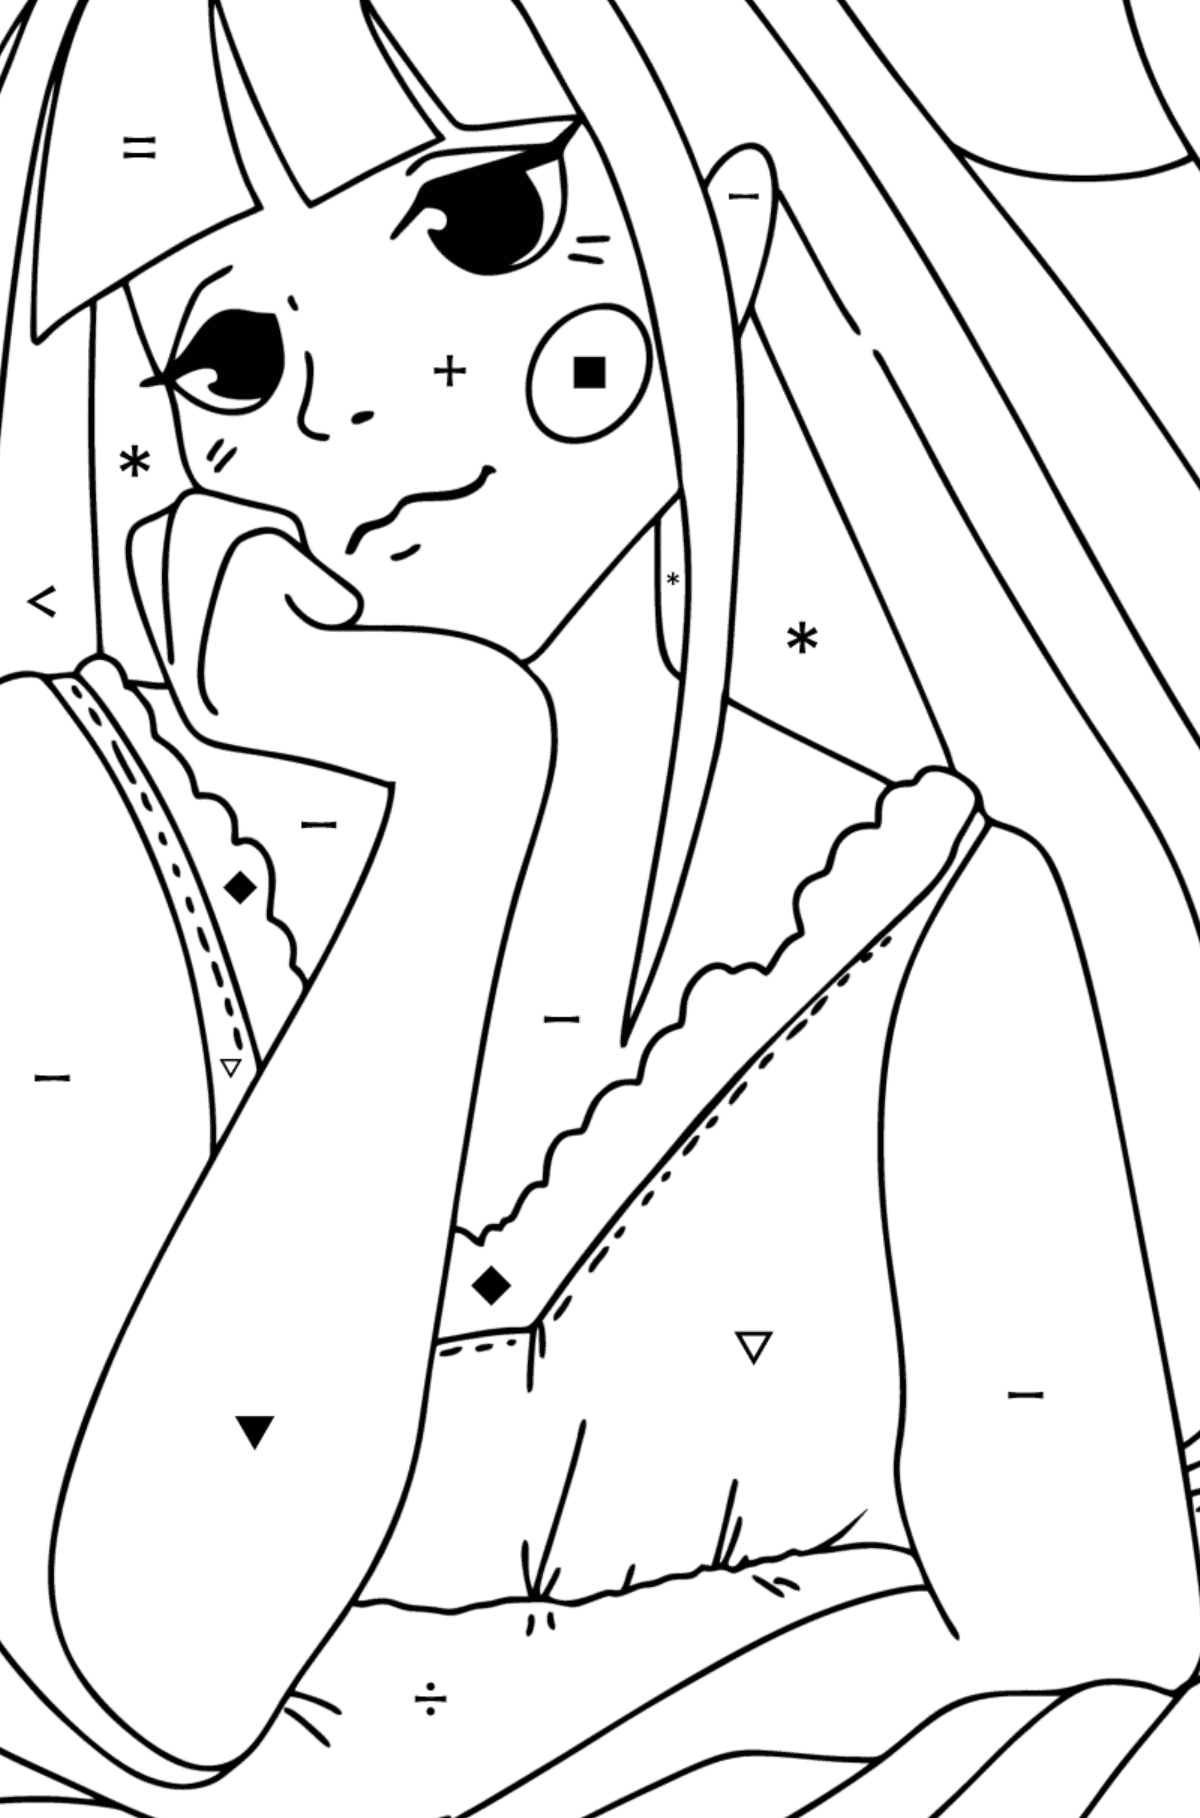 Teenage anime girl coloring page - Coloring by Symbols for Kids